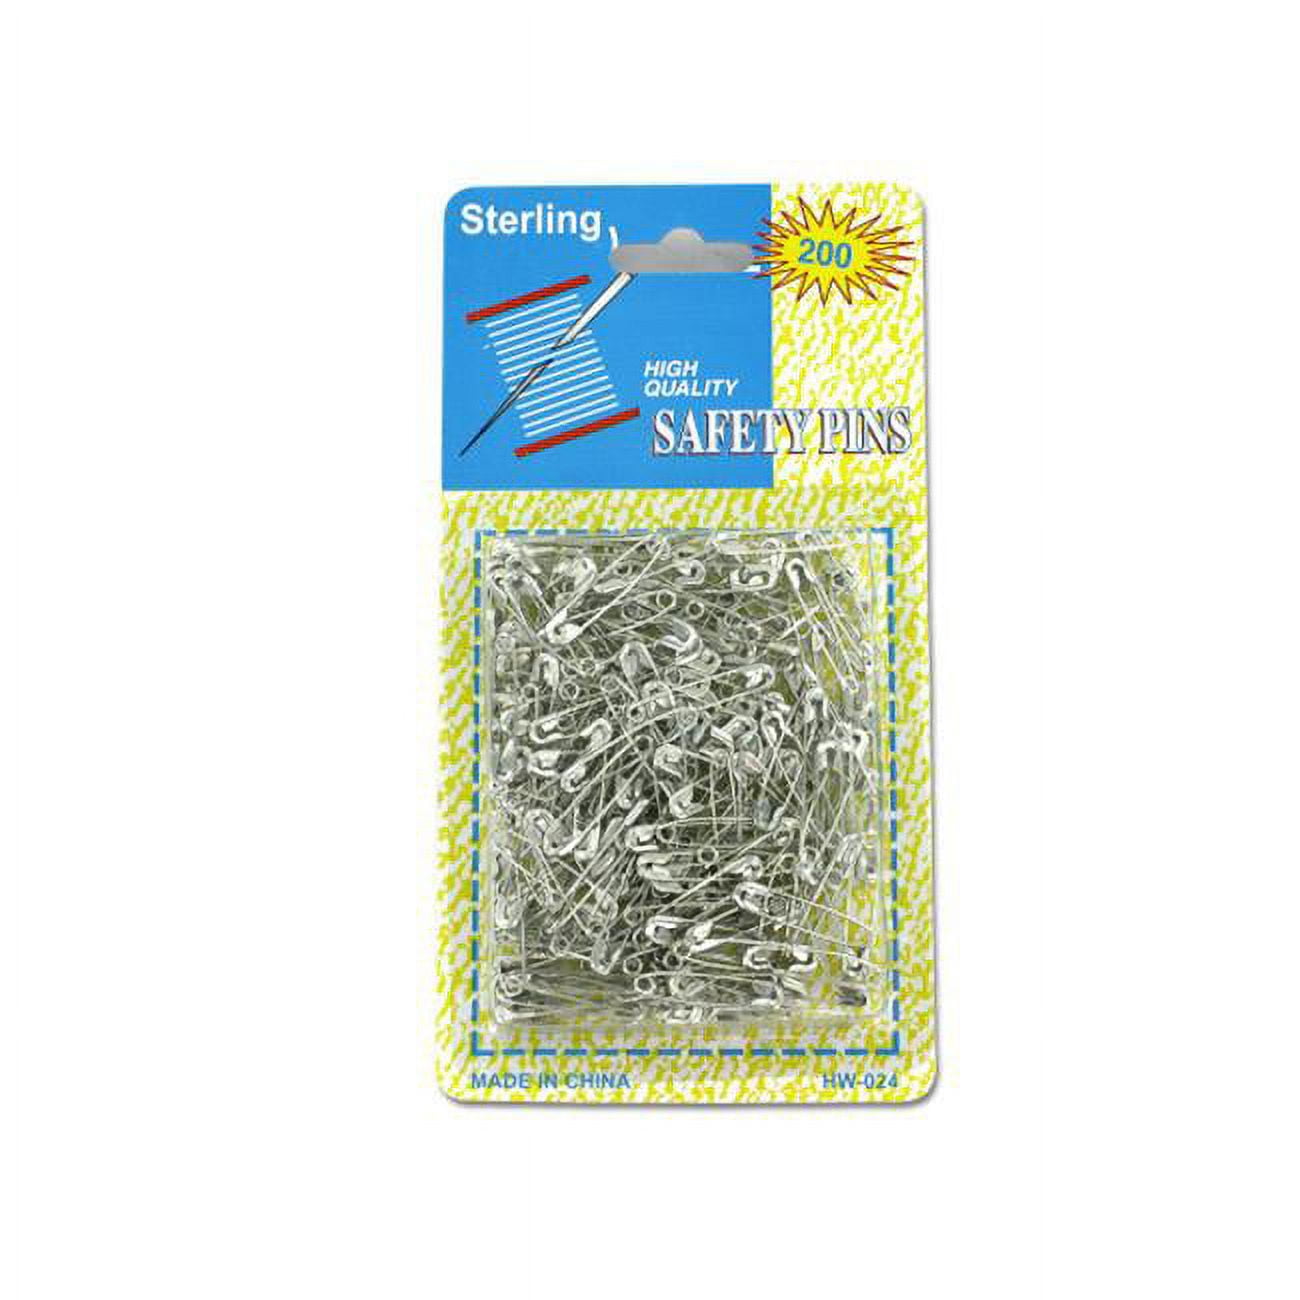 HKIDEE Standard Multi-Size Safety Pins, 460-Pack